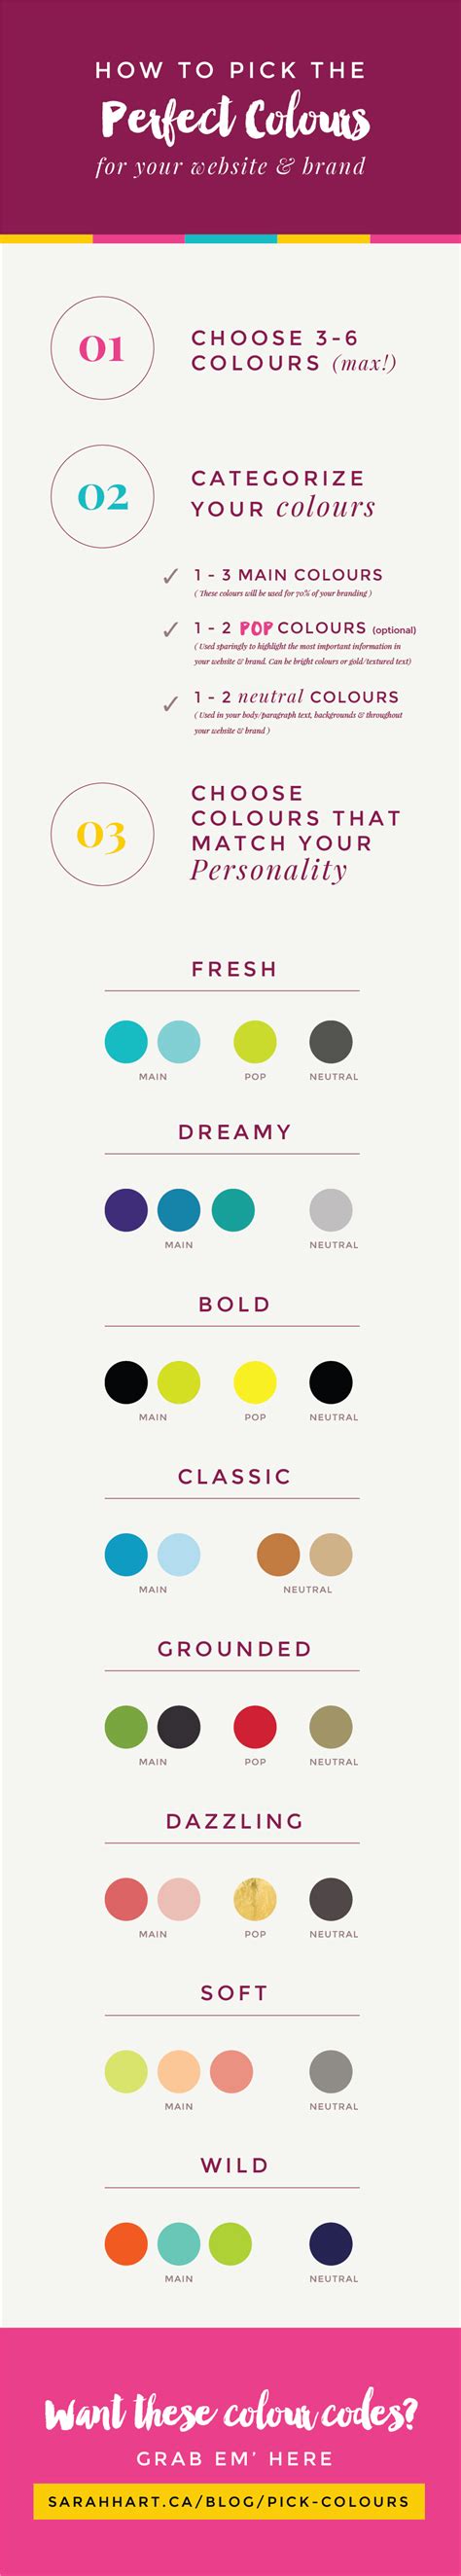 How To Pick The Perfect Colours For Your Website And Brand Infographic